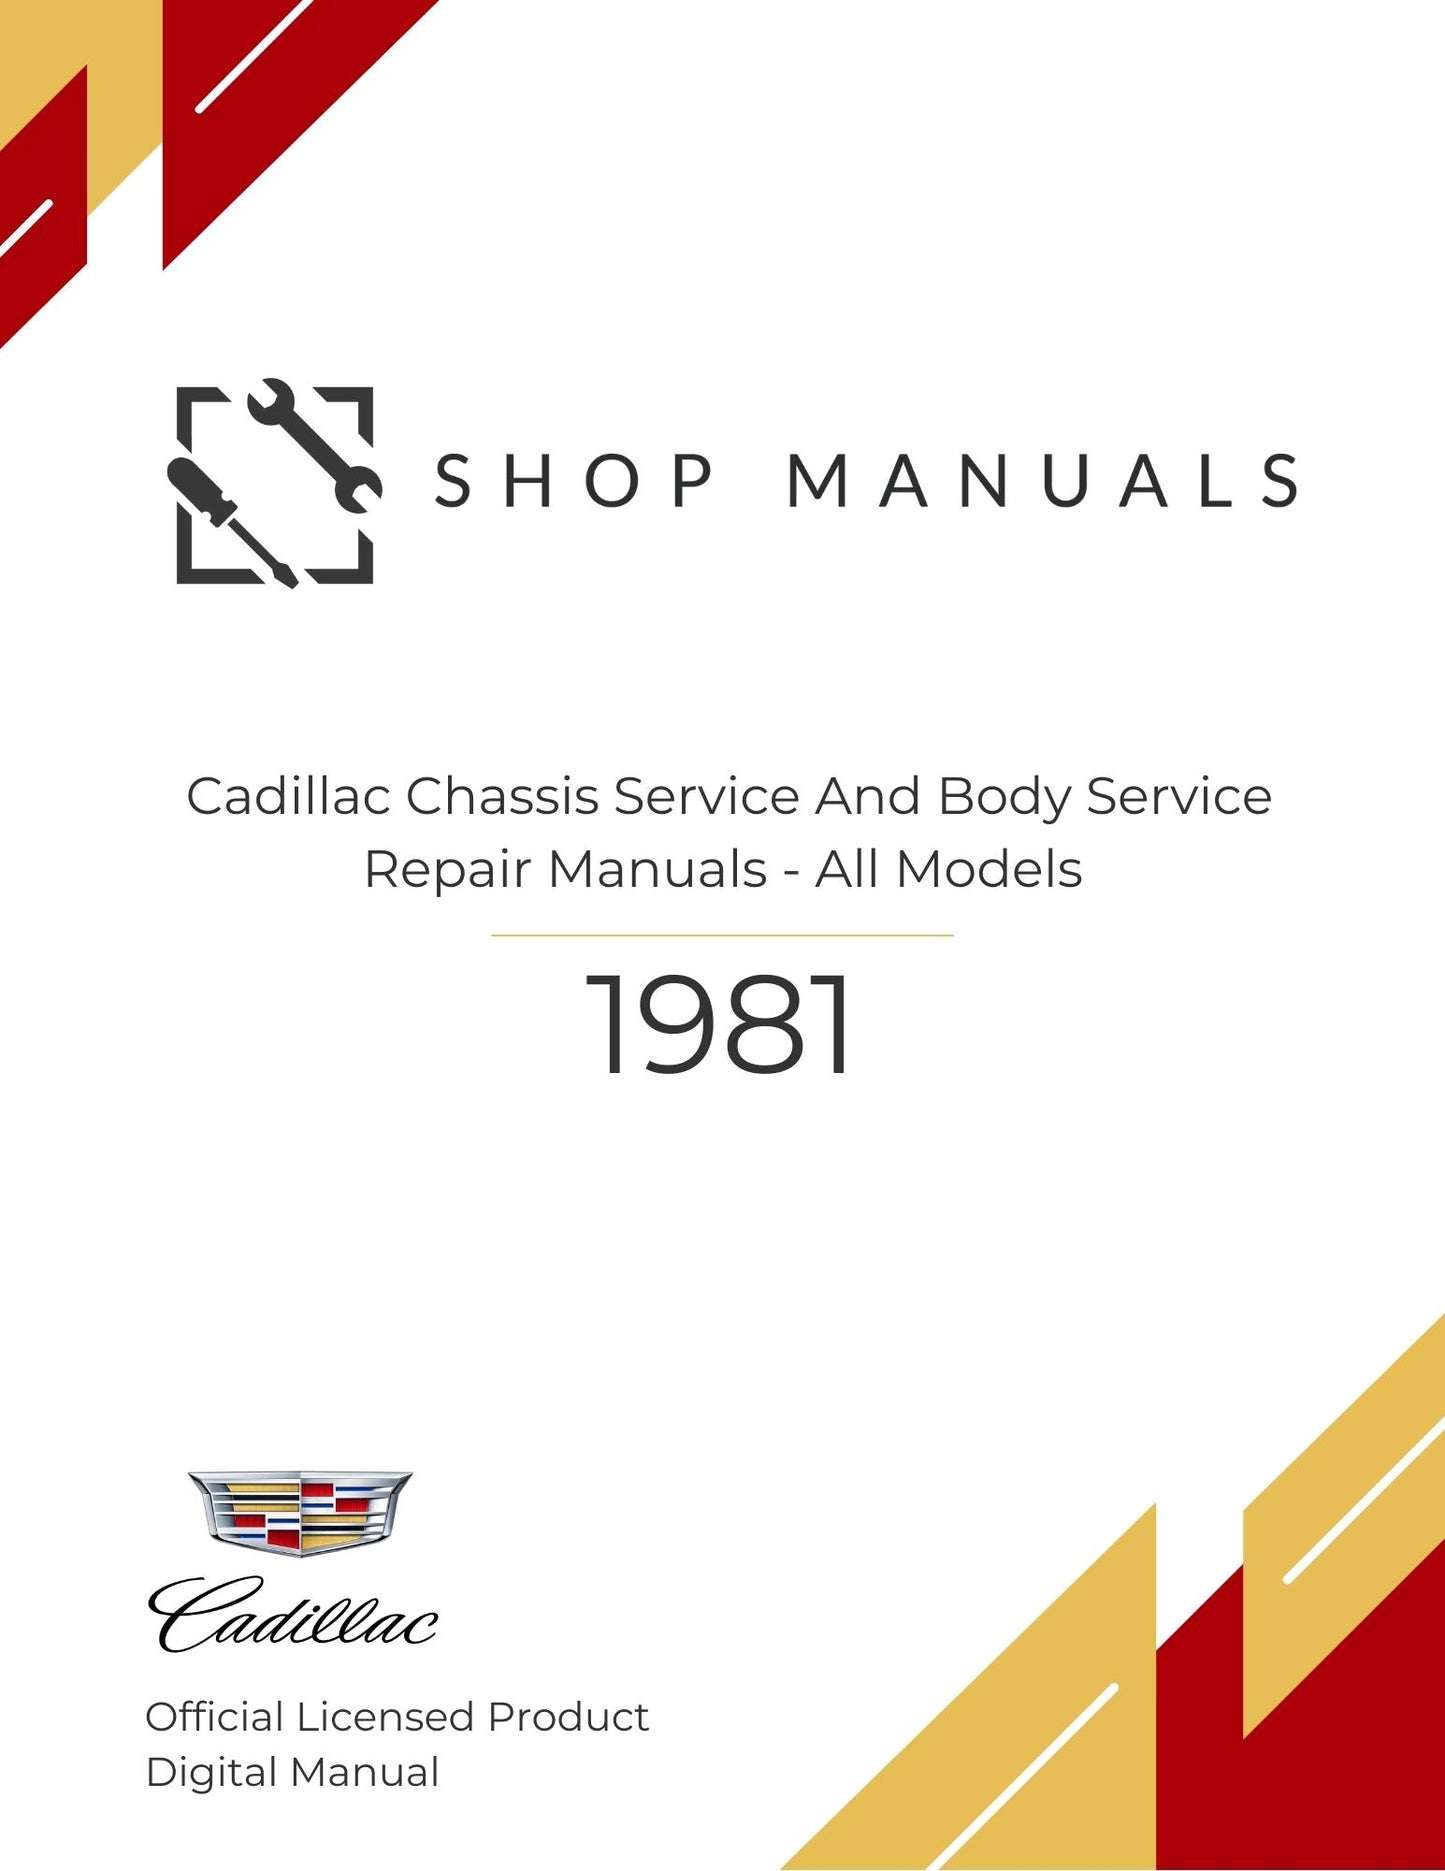 1981 Cadillac Chassis Service and Body Service Repair Manuals - All Models